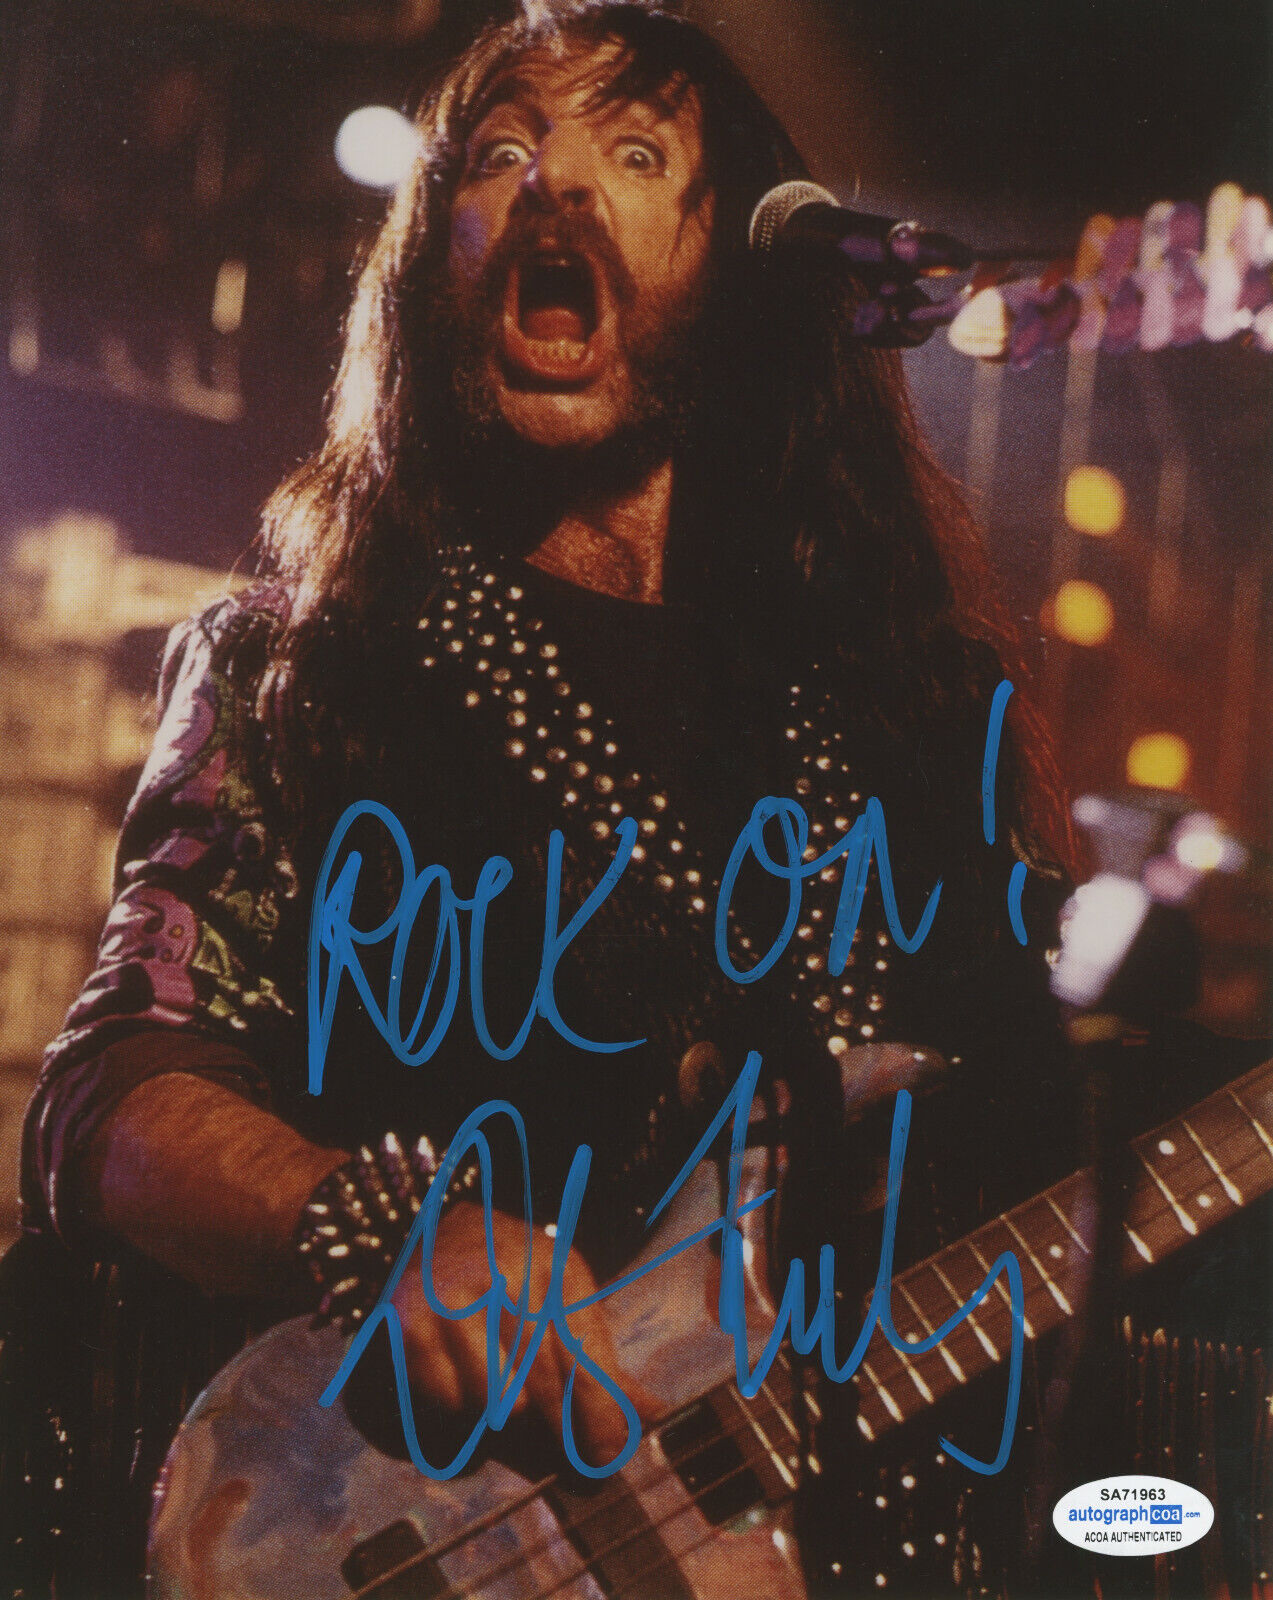 HARRY SHEARER as DEREK SMALLS SIGNED THIS IS SPINAL TAP